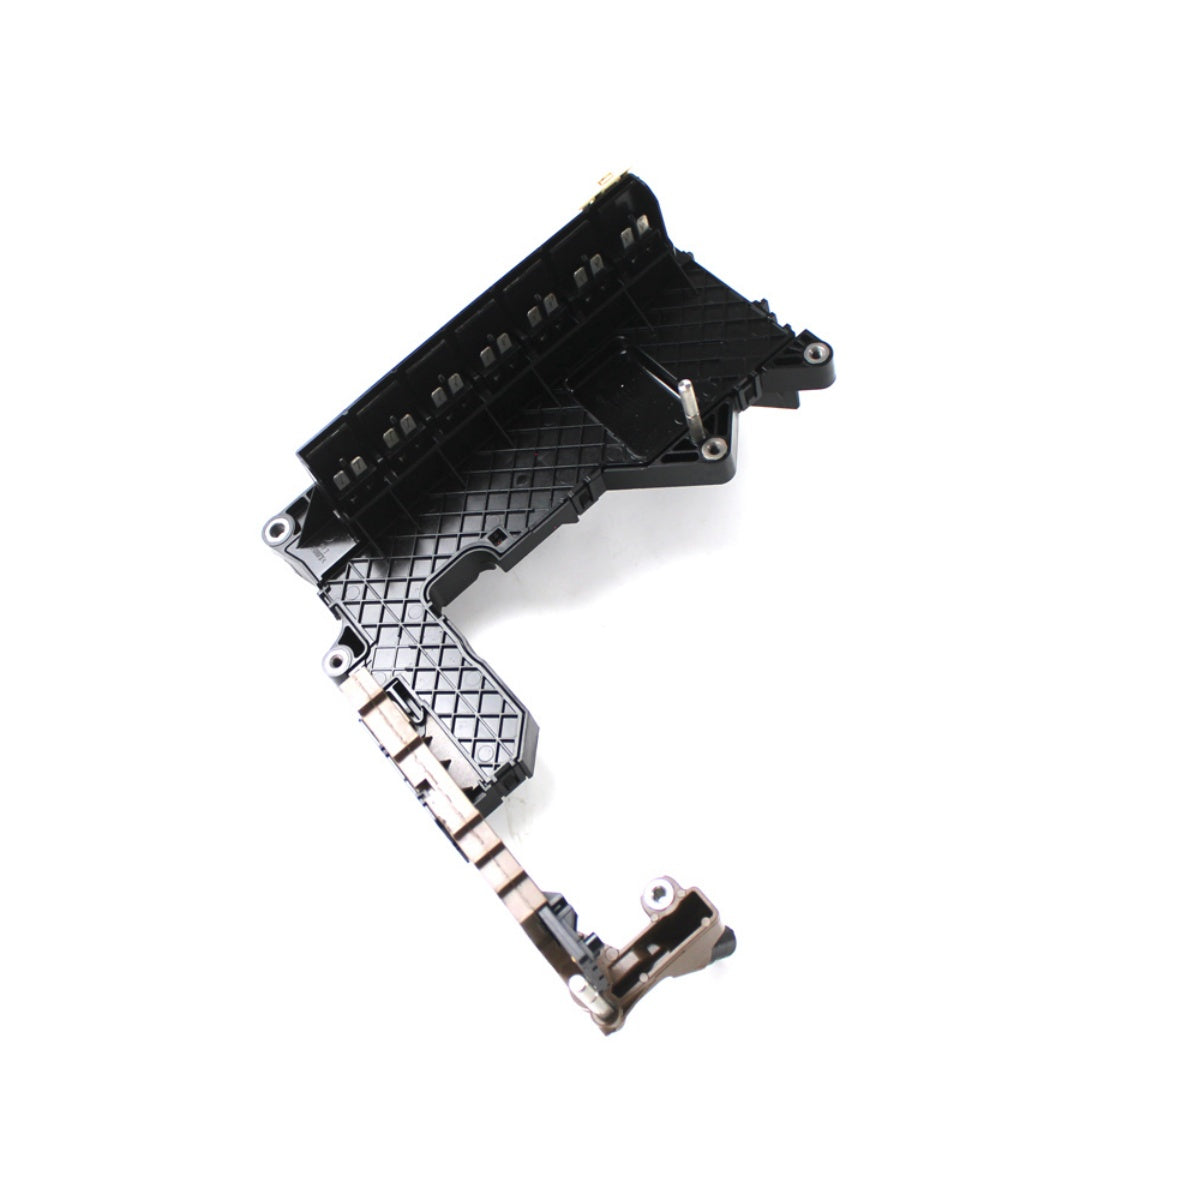 Transmission Condcutor Plate Lead Frame 6R80 for 2011-2016 Ford, Car Transmission Condcutor Plate Lead Frame